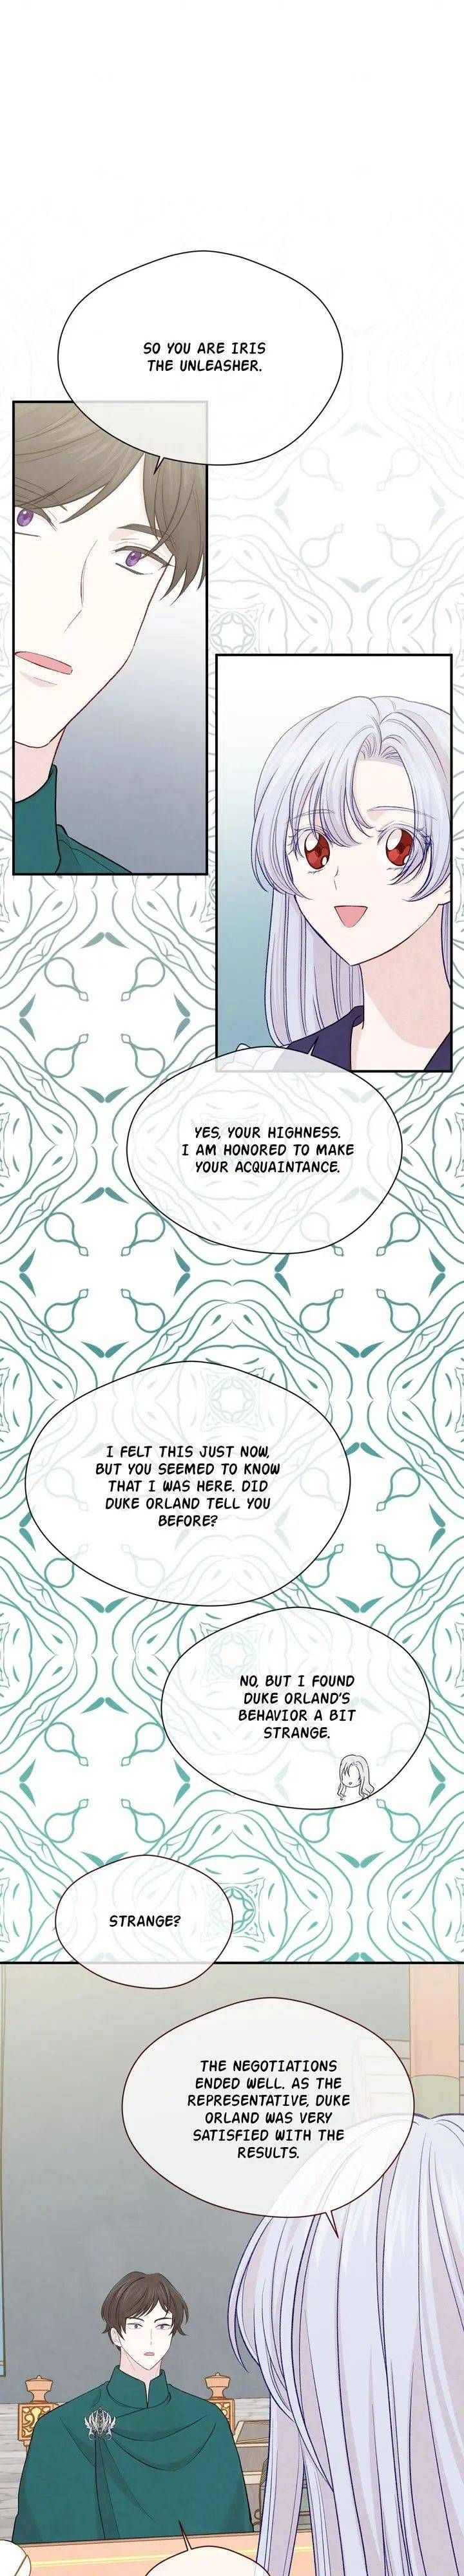 IRIS - Lady with a Smartphone Chapter 109 page 7